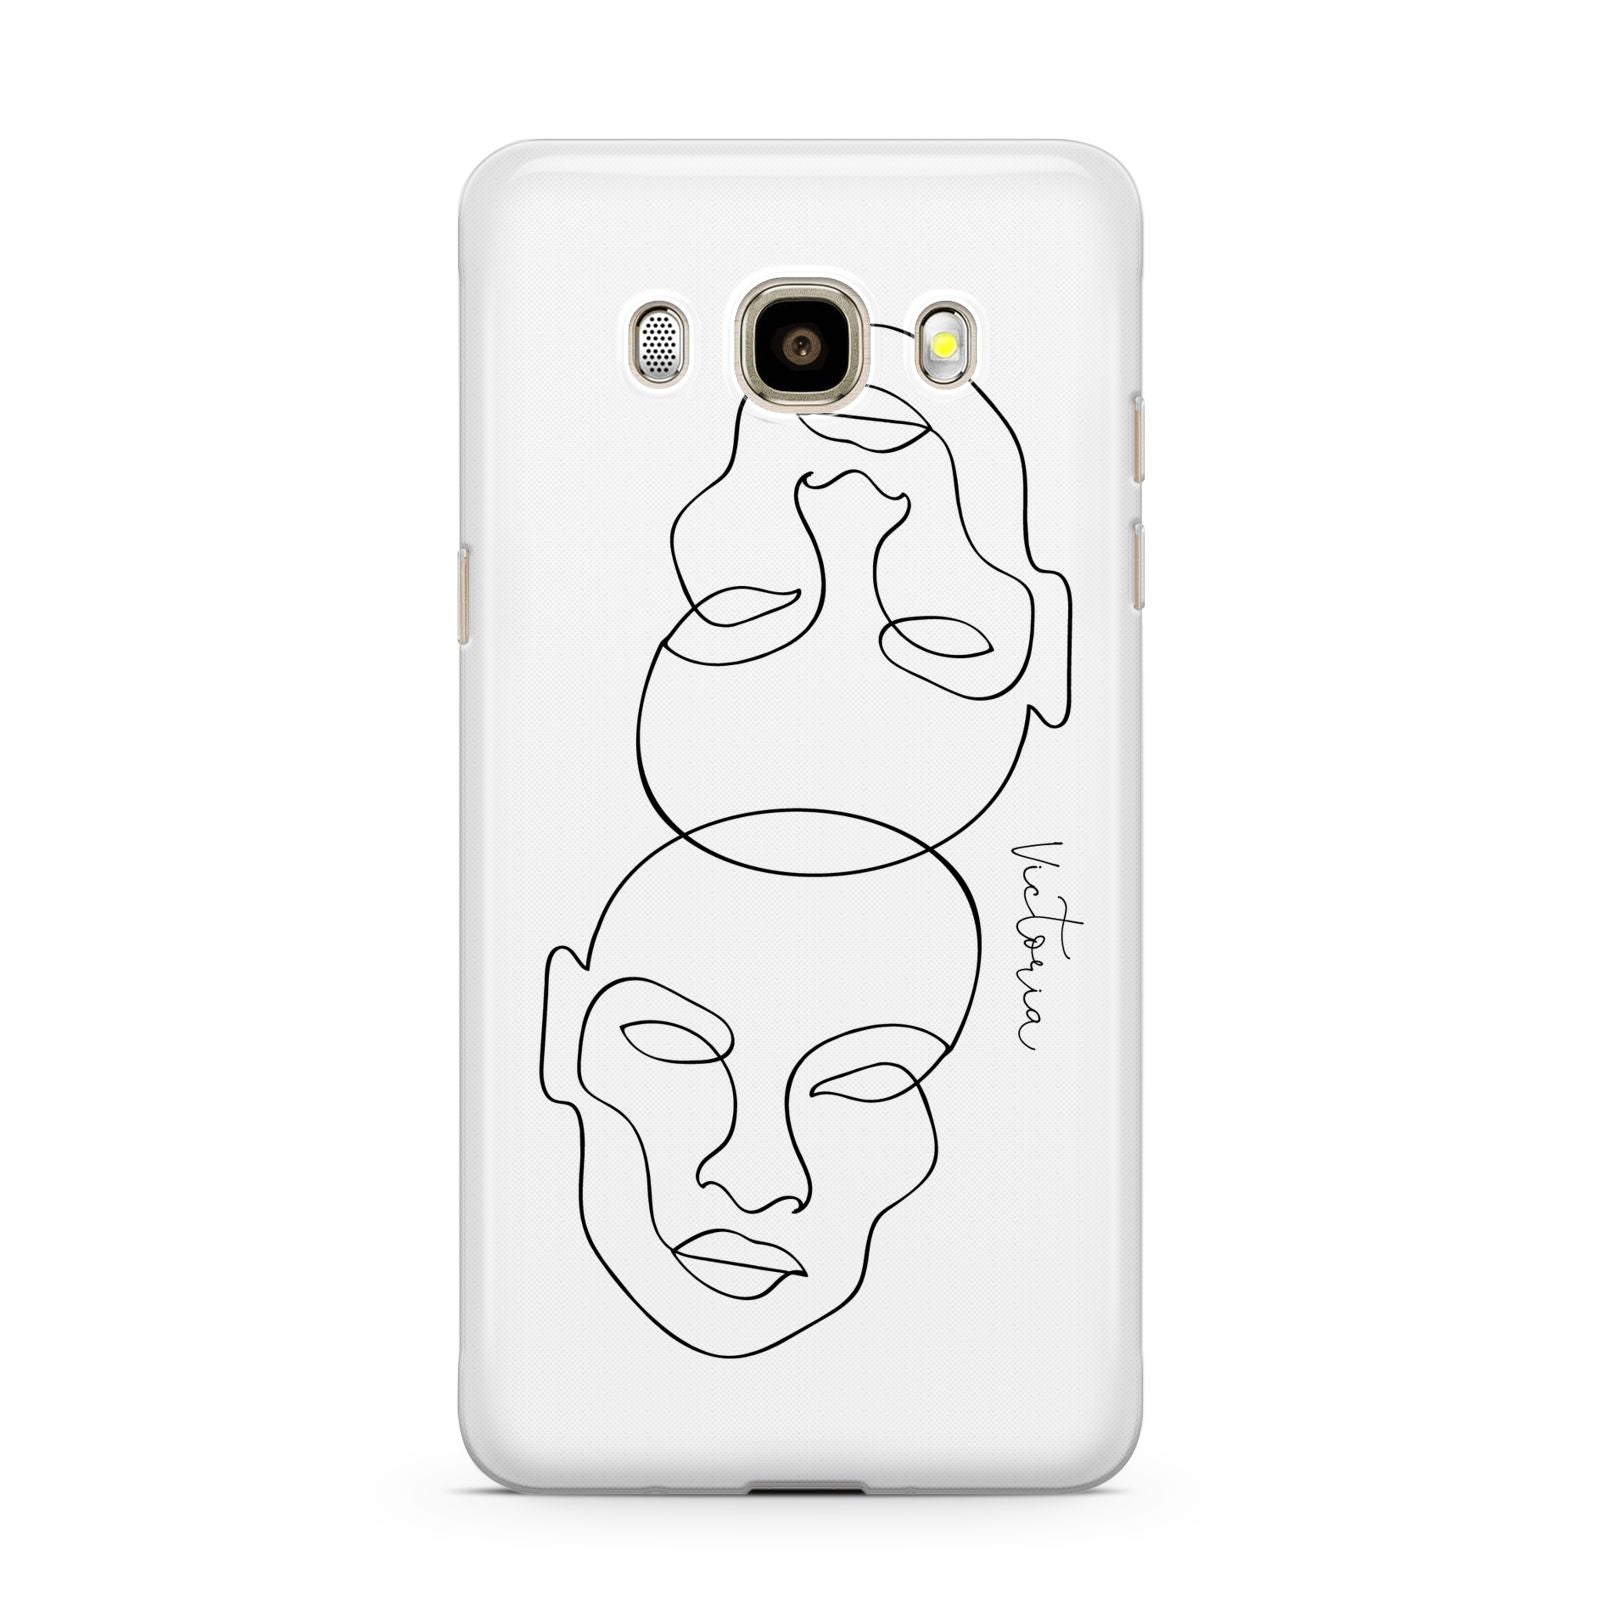 Personalised White Line Art Samsung Galaxy J7 2016 Case on gold phone